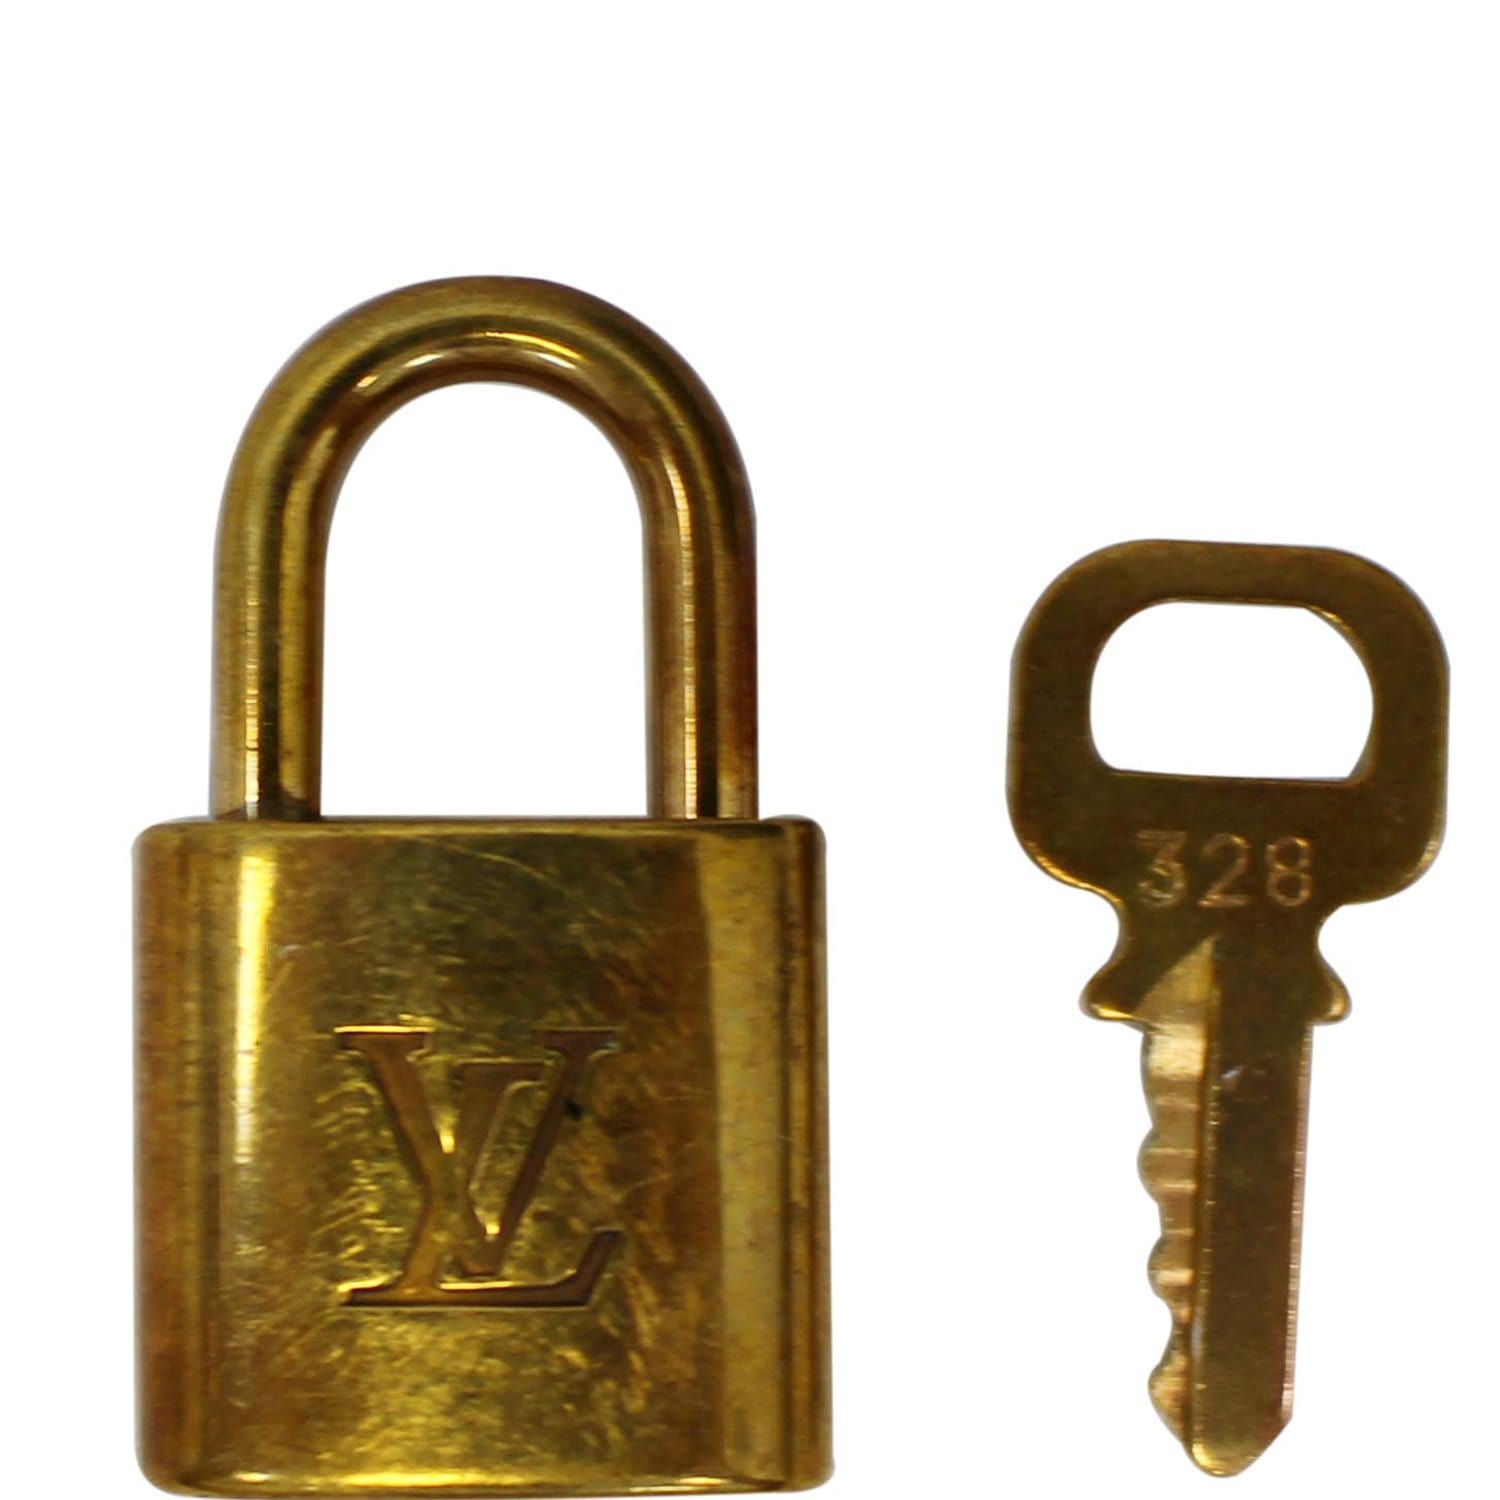 LOUIS VUITTON Padlock and 1Key No.301 Gold Tone Authentic from